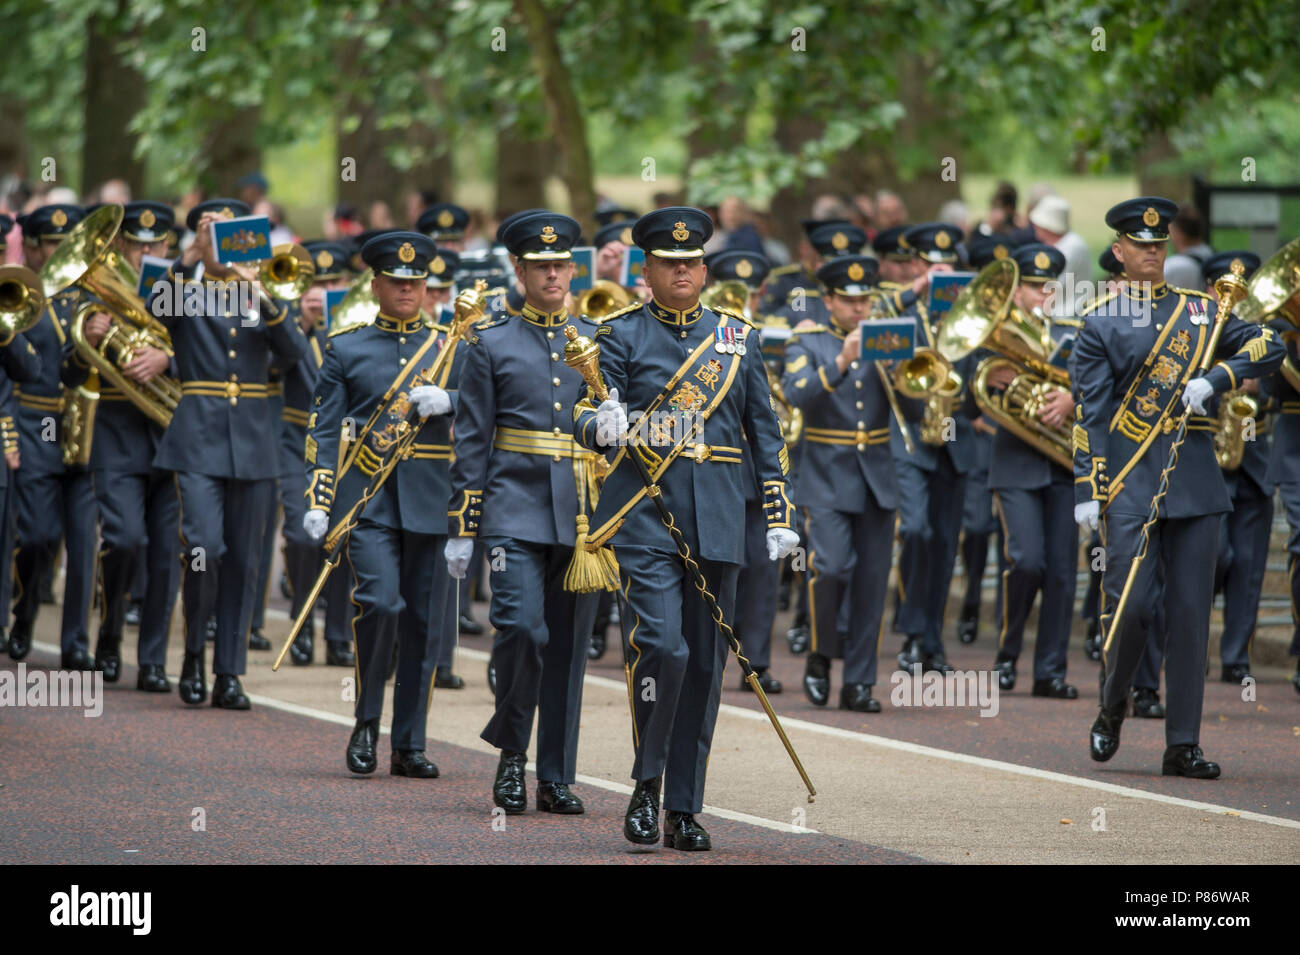 Birdcage Walk, London, UK. 10 July, 2018. Celebrations to mark the Centenary of the Royal Air Force take place in London with the Central Band and Escort of the RAF marching to Horse Guards Parade. Credit: Malcolm Park/Alamy Live News. Stock Photo